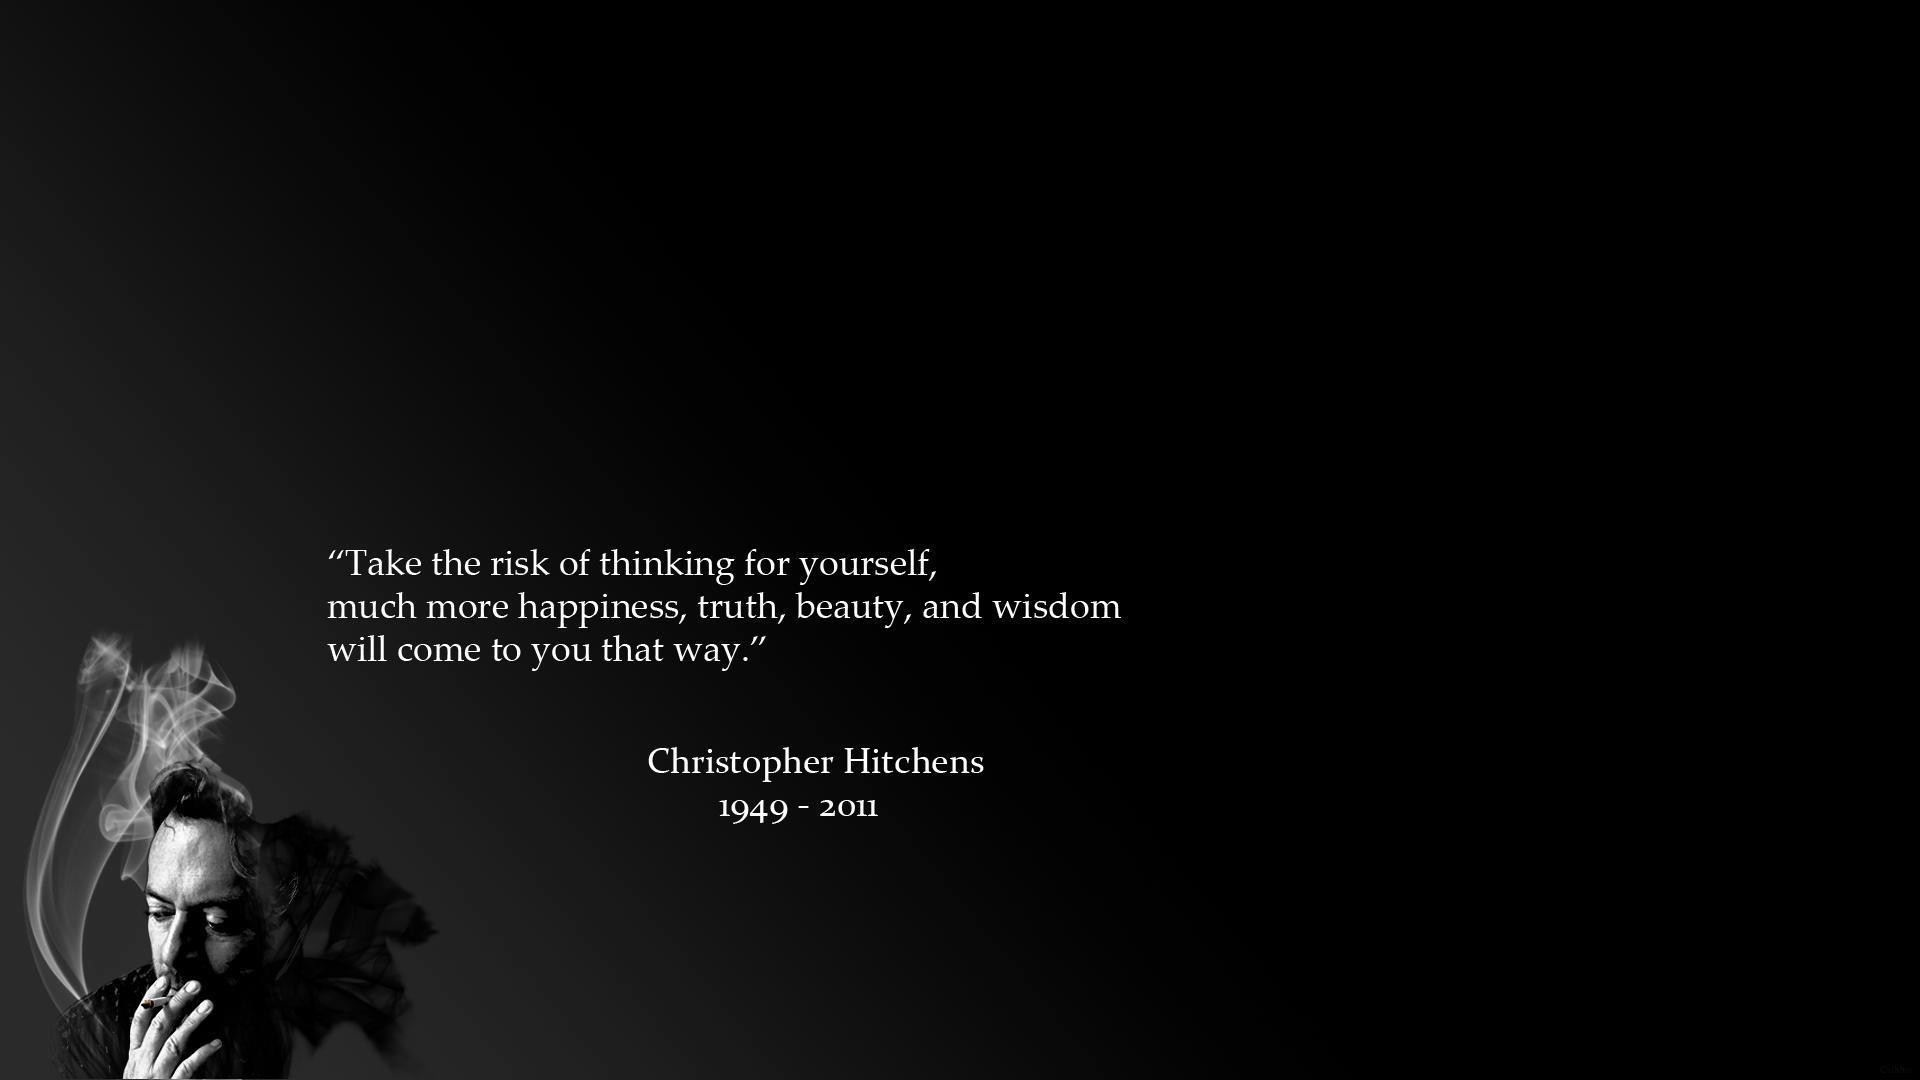 Philosophical Quotes Backgrounds For Desktop QuotesGram